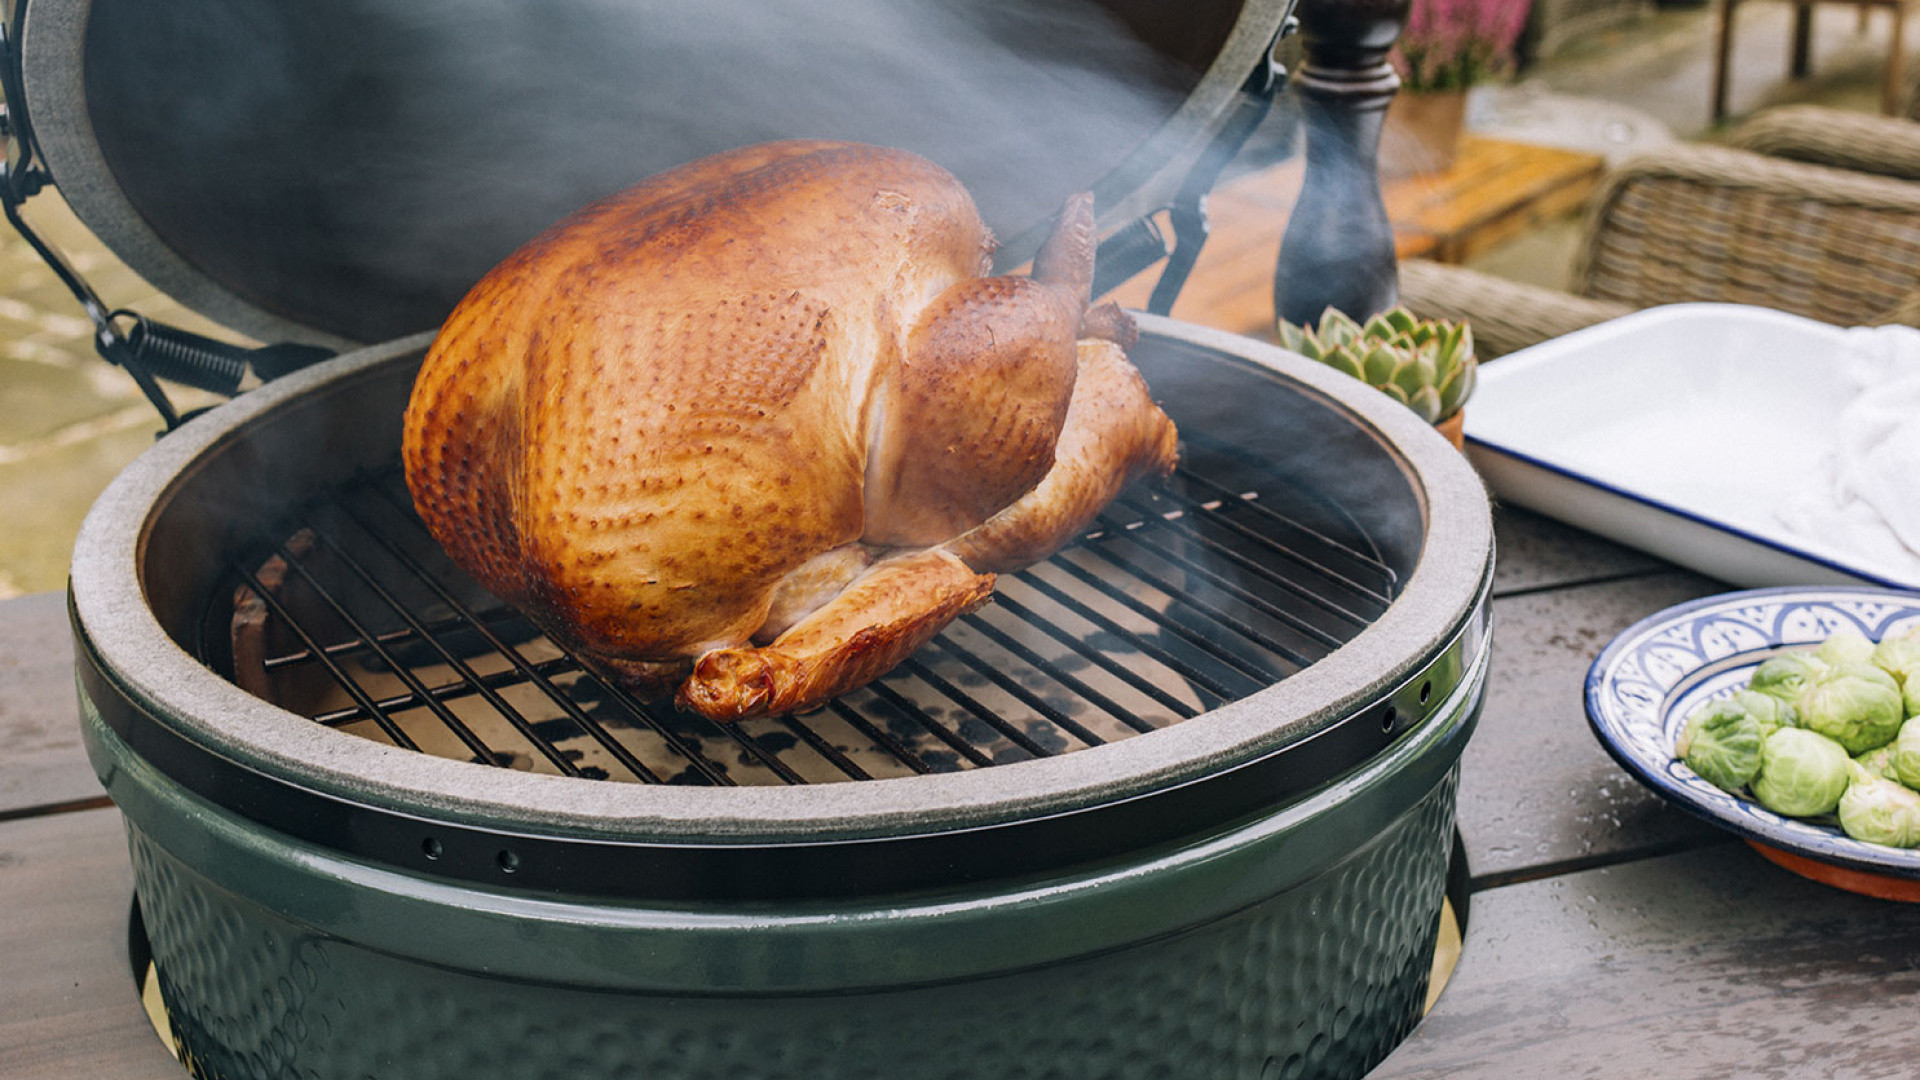 Big Green Egg Thanksgiving Turkey
 Make the perfect turkey this year with Big Green Egg